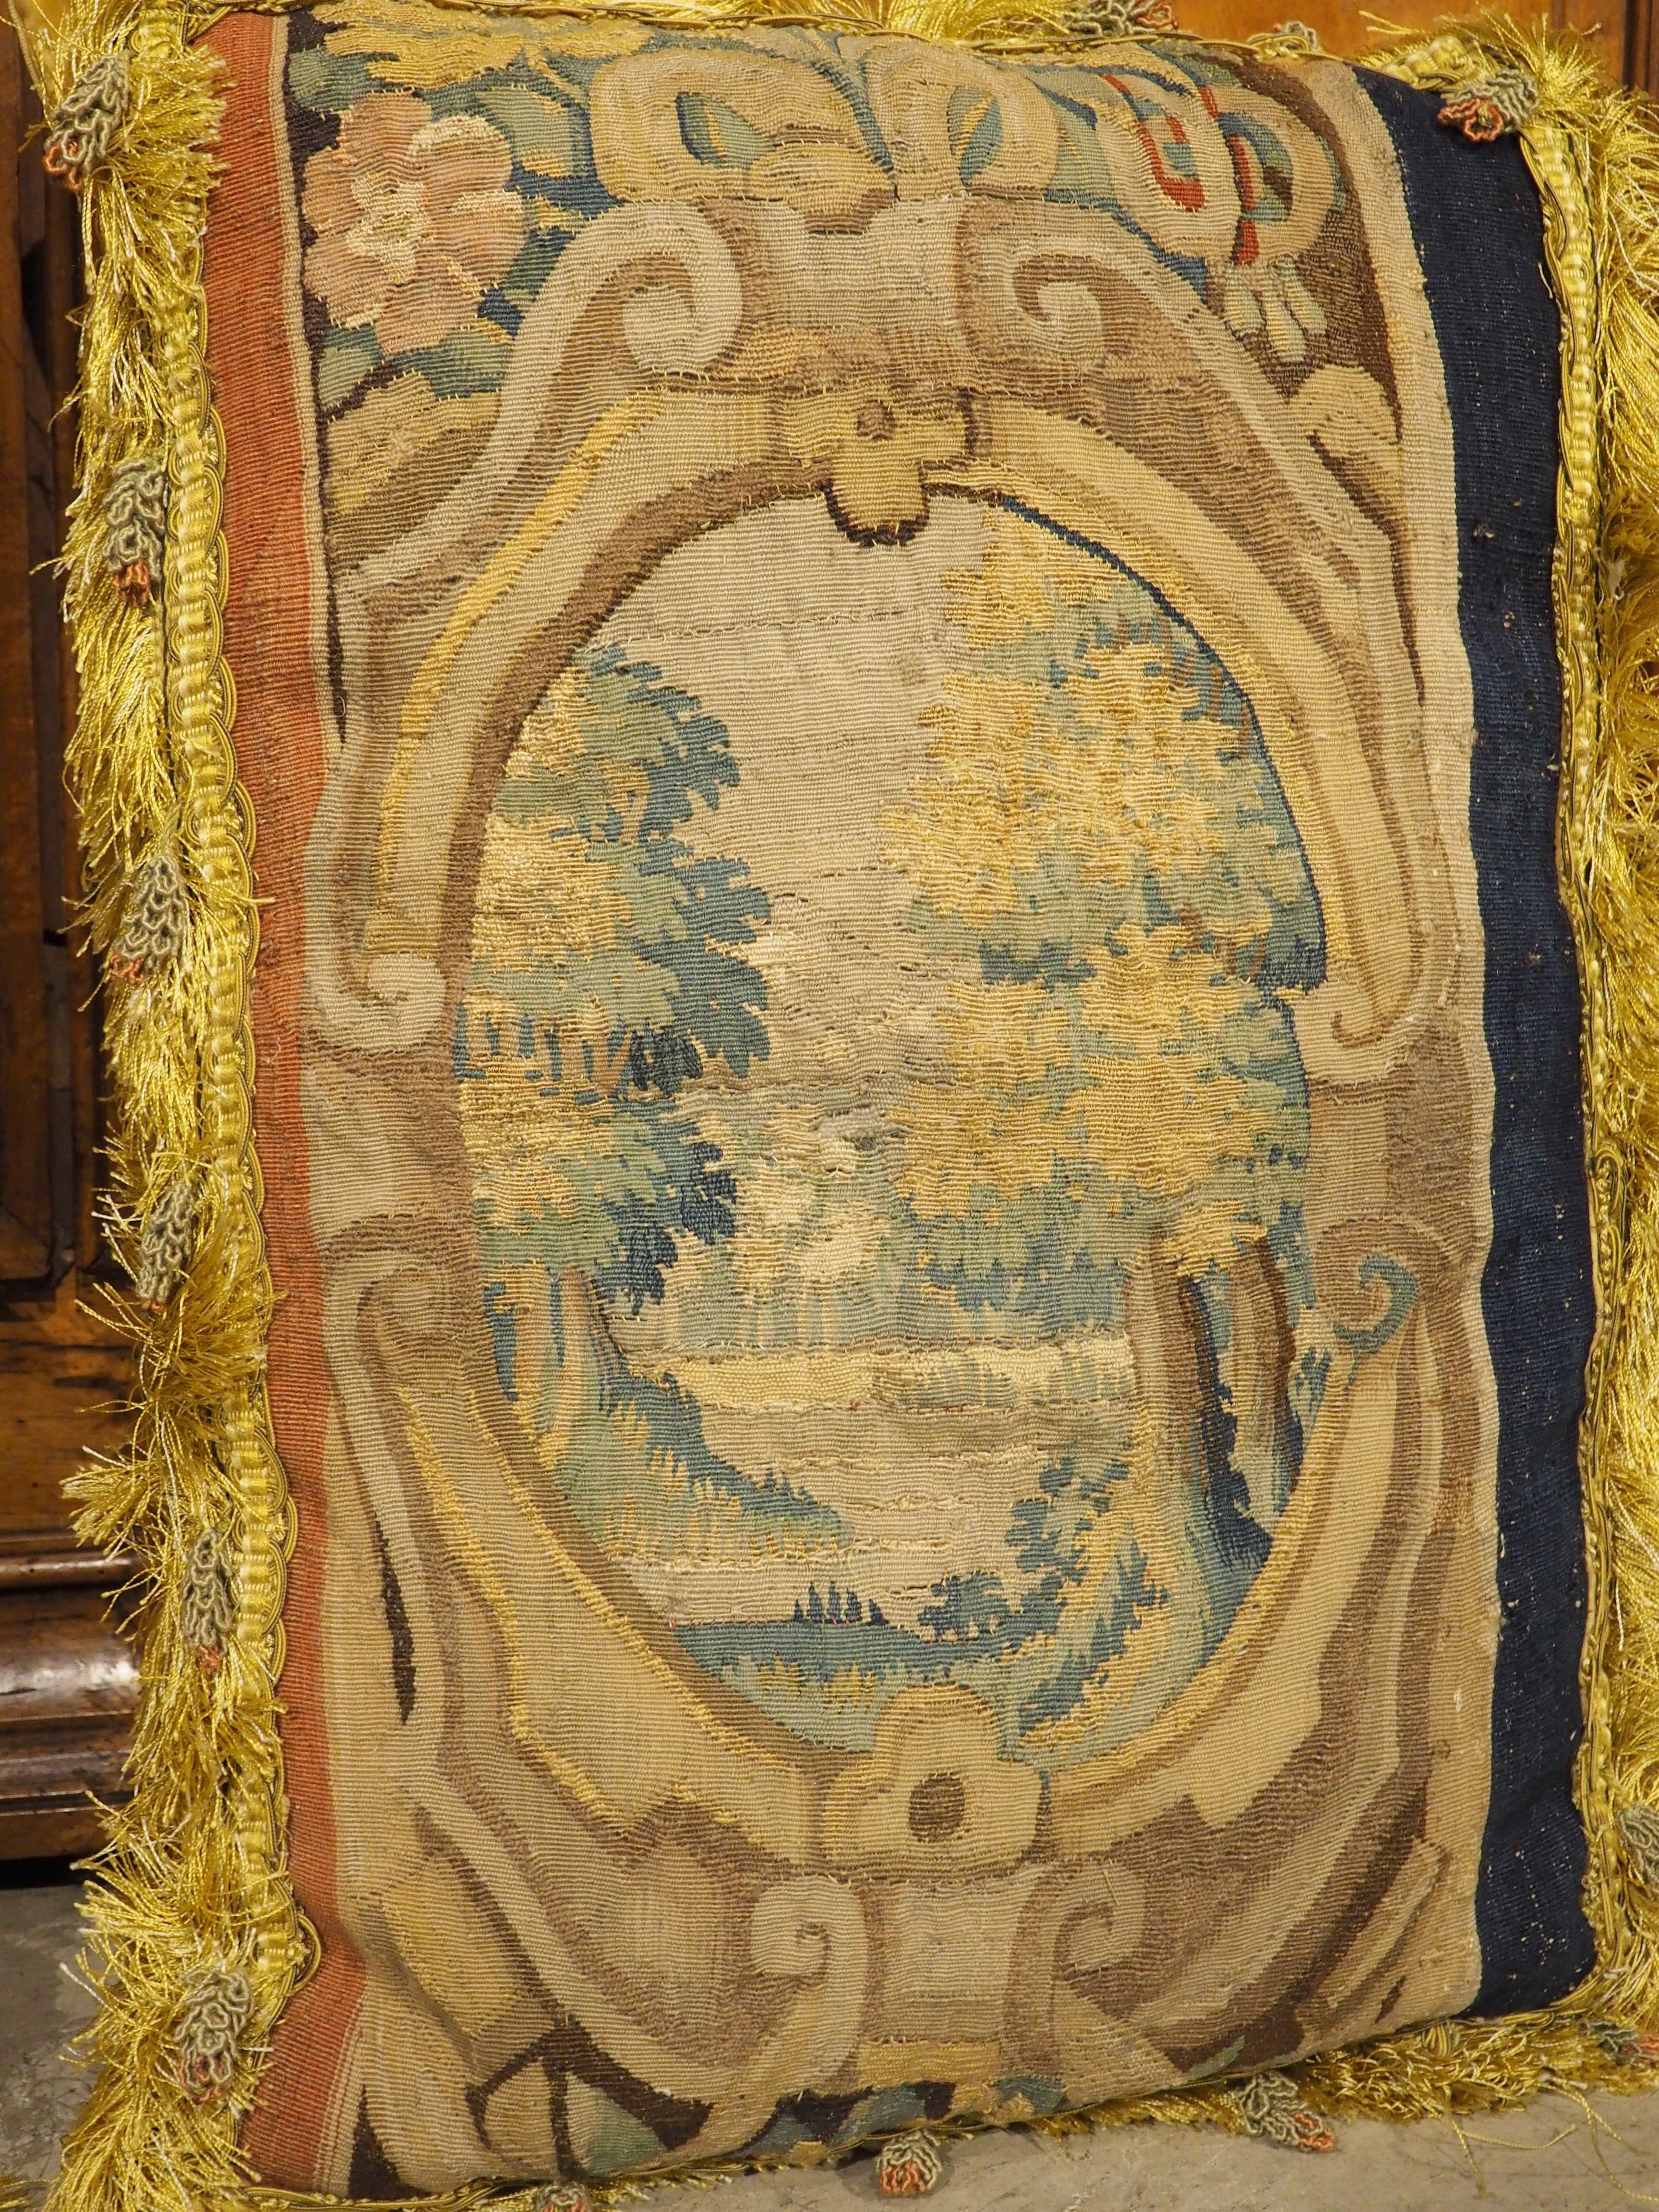 Hand-Woven Two Tapestry Pillows from 17th Century Audenarde Fragments